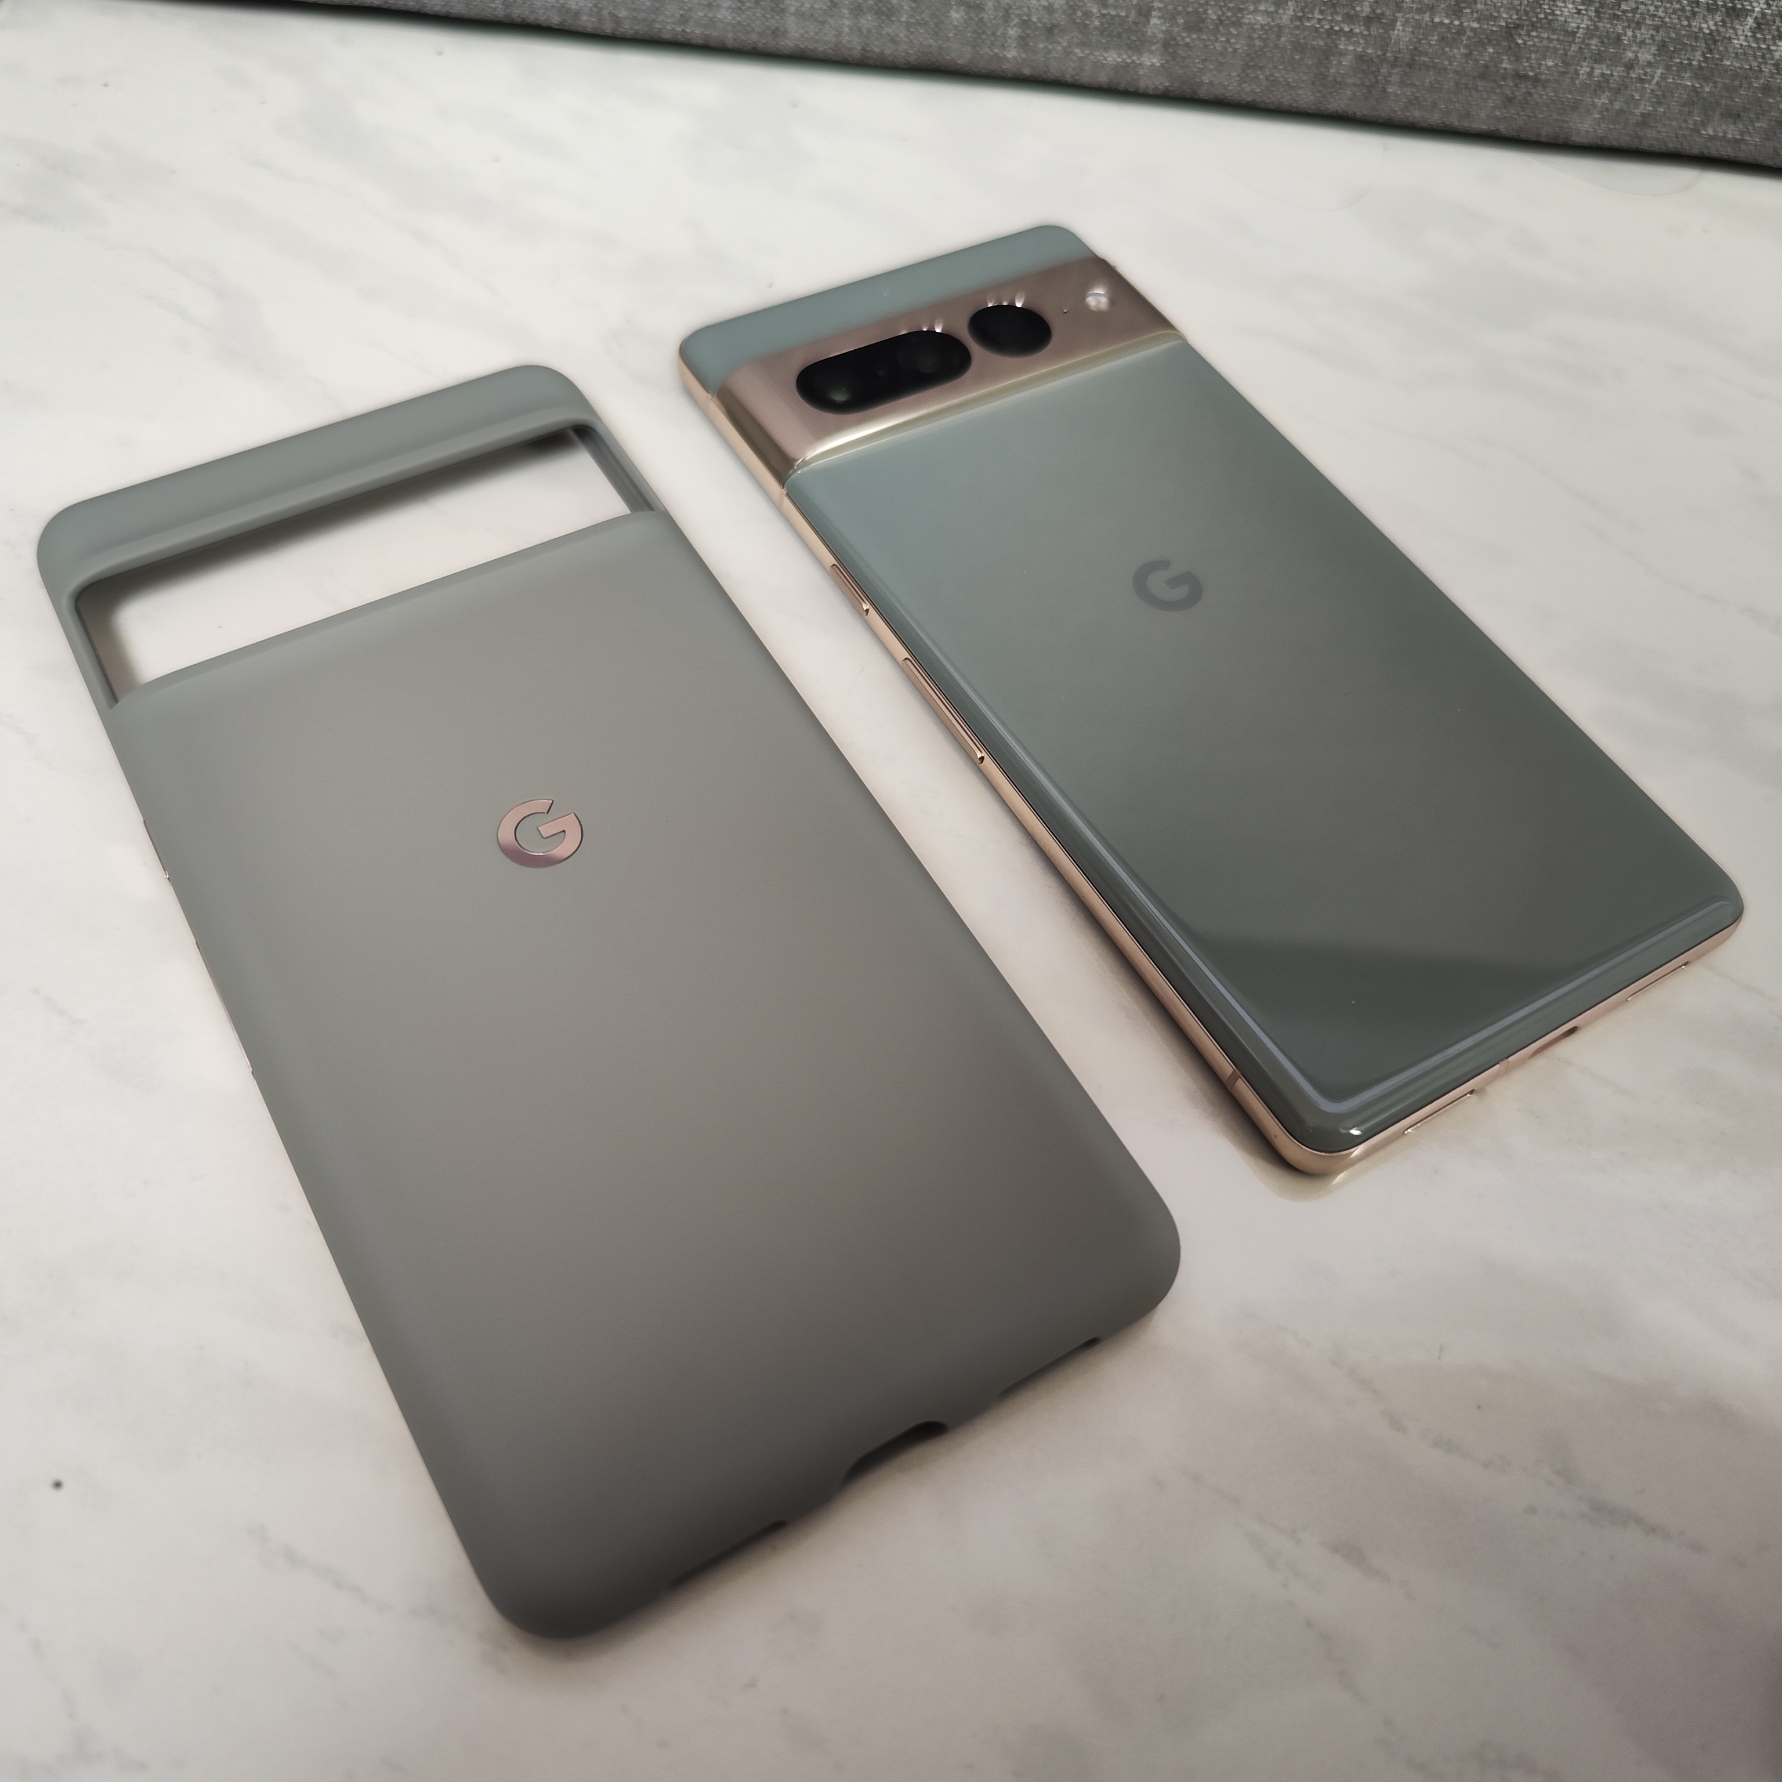 Google Pixel 7 And Google Pixel 7 Pro Review - Gazelle The Horn